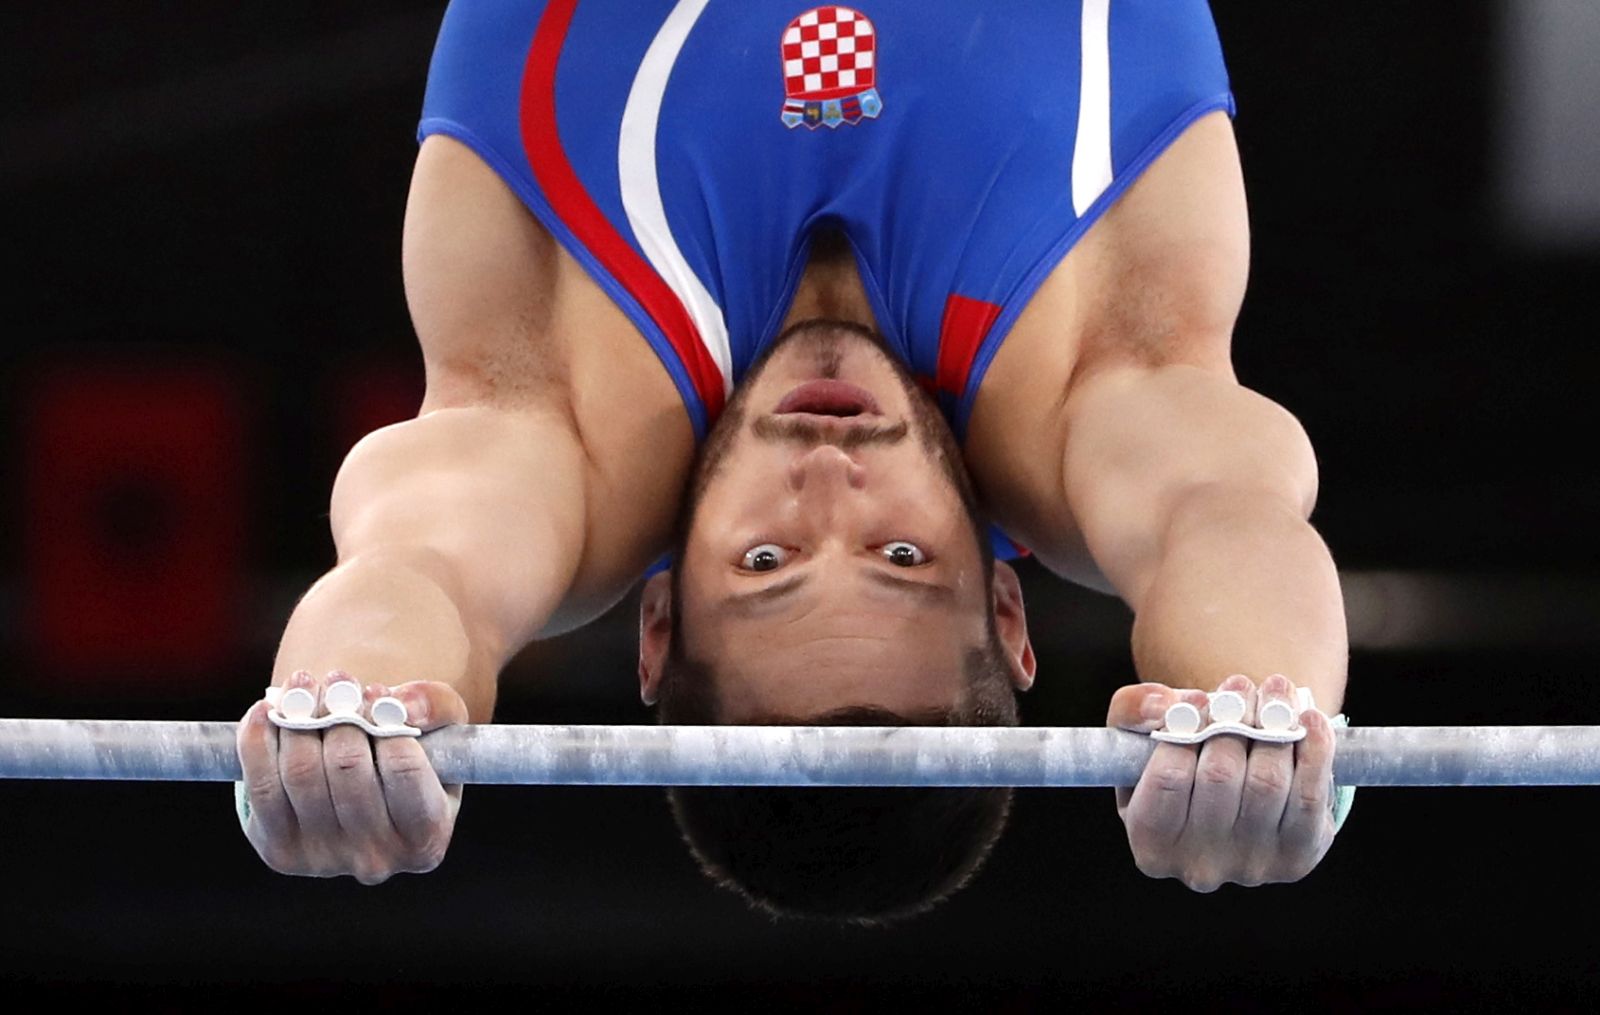 epa09360795 Tin Srbic of Croatia performs during the men's Horizontal Bar Qualification for the Tokyo 2020 Olympic Games at the Ariake Gymnastics Centre in Tokyo, Japan, 24 July 2021.  EPA/TATYANA ZENKOVICH